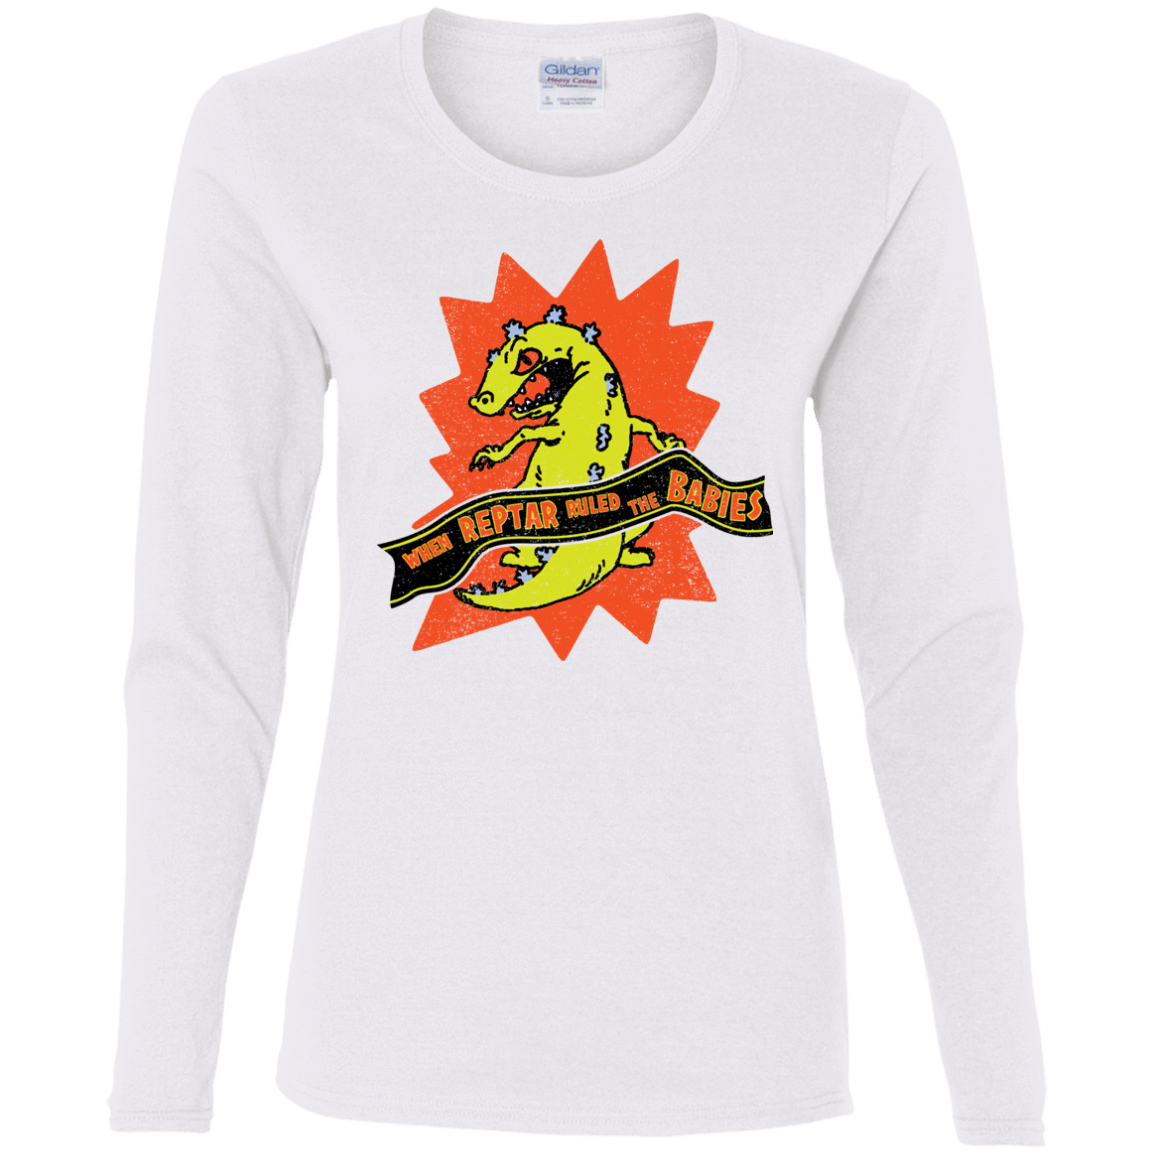 T-Shirts White / S When Reptar Ruled The Babies Women's Long Sleeve T-Shirt